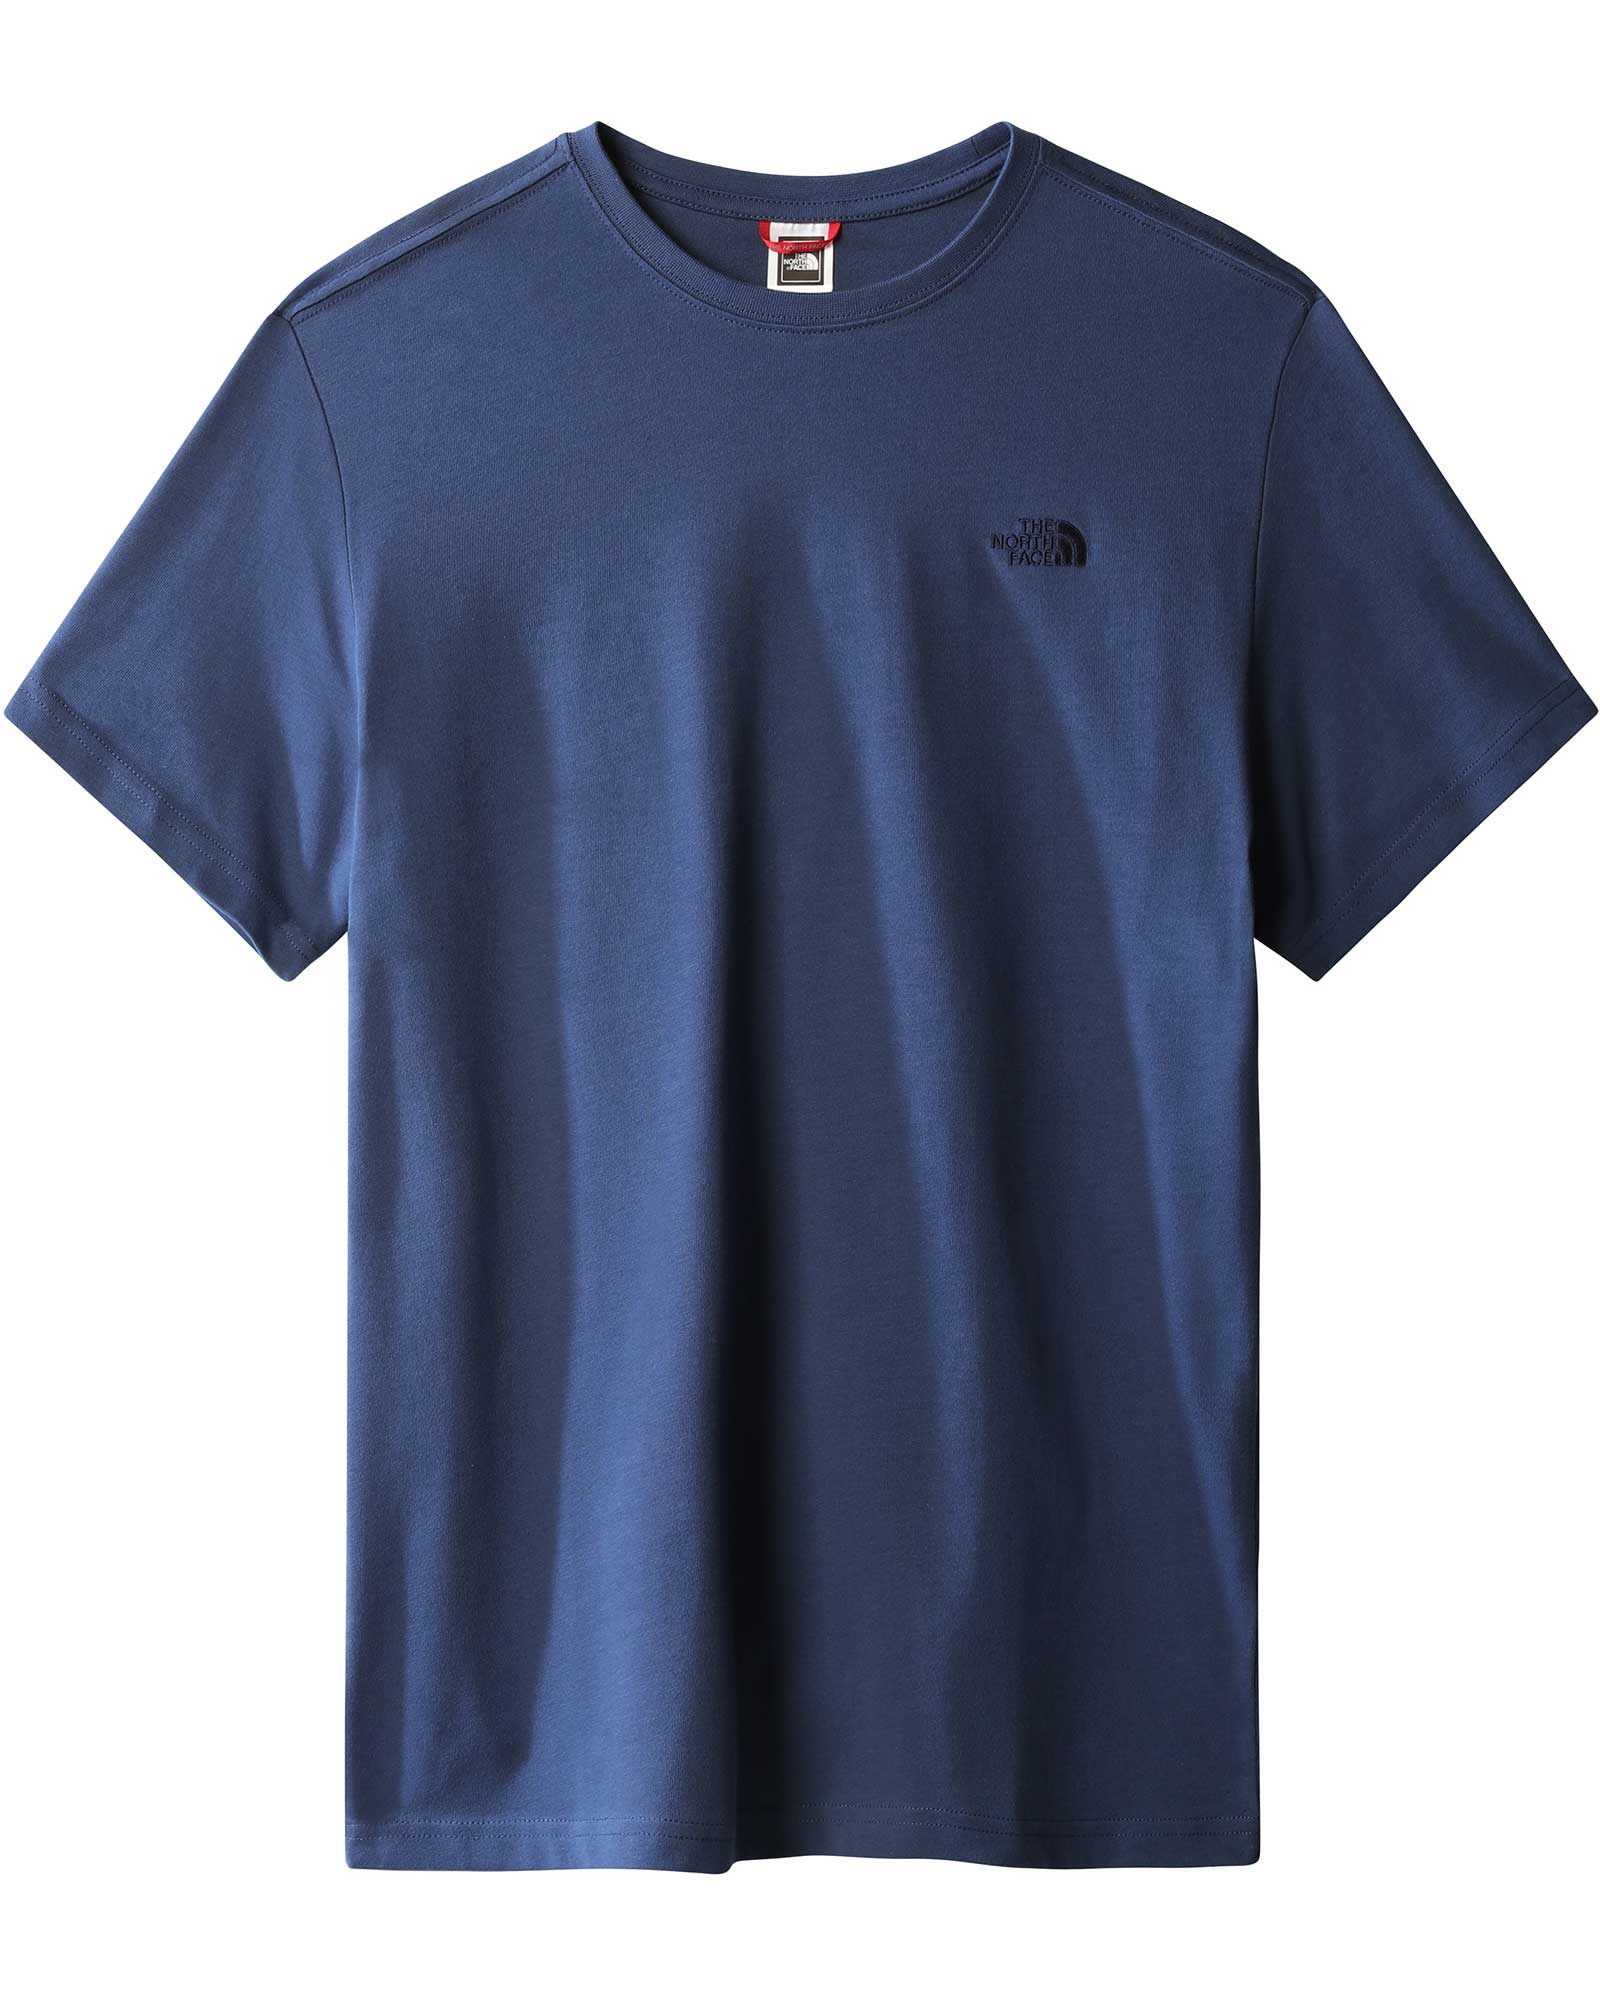 Product image of The North Face City Standard Logo Men's T-Shirt